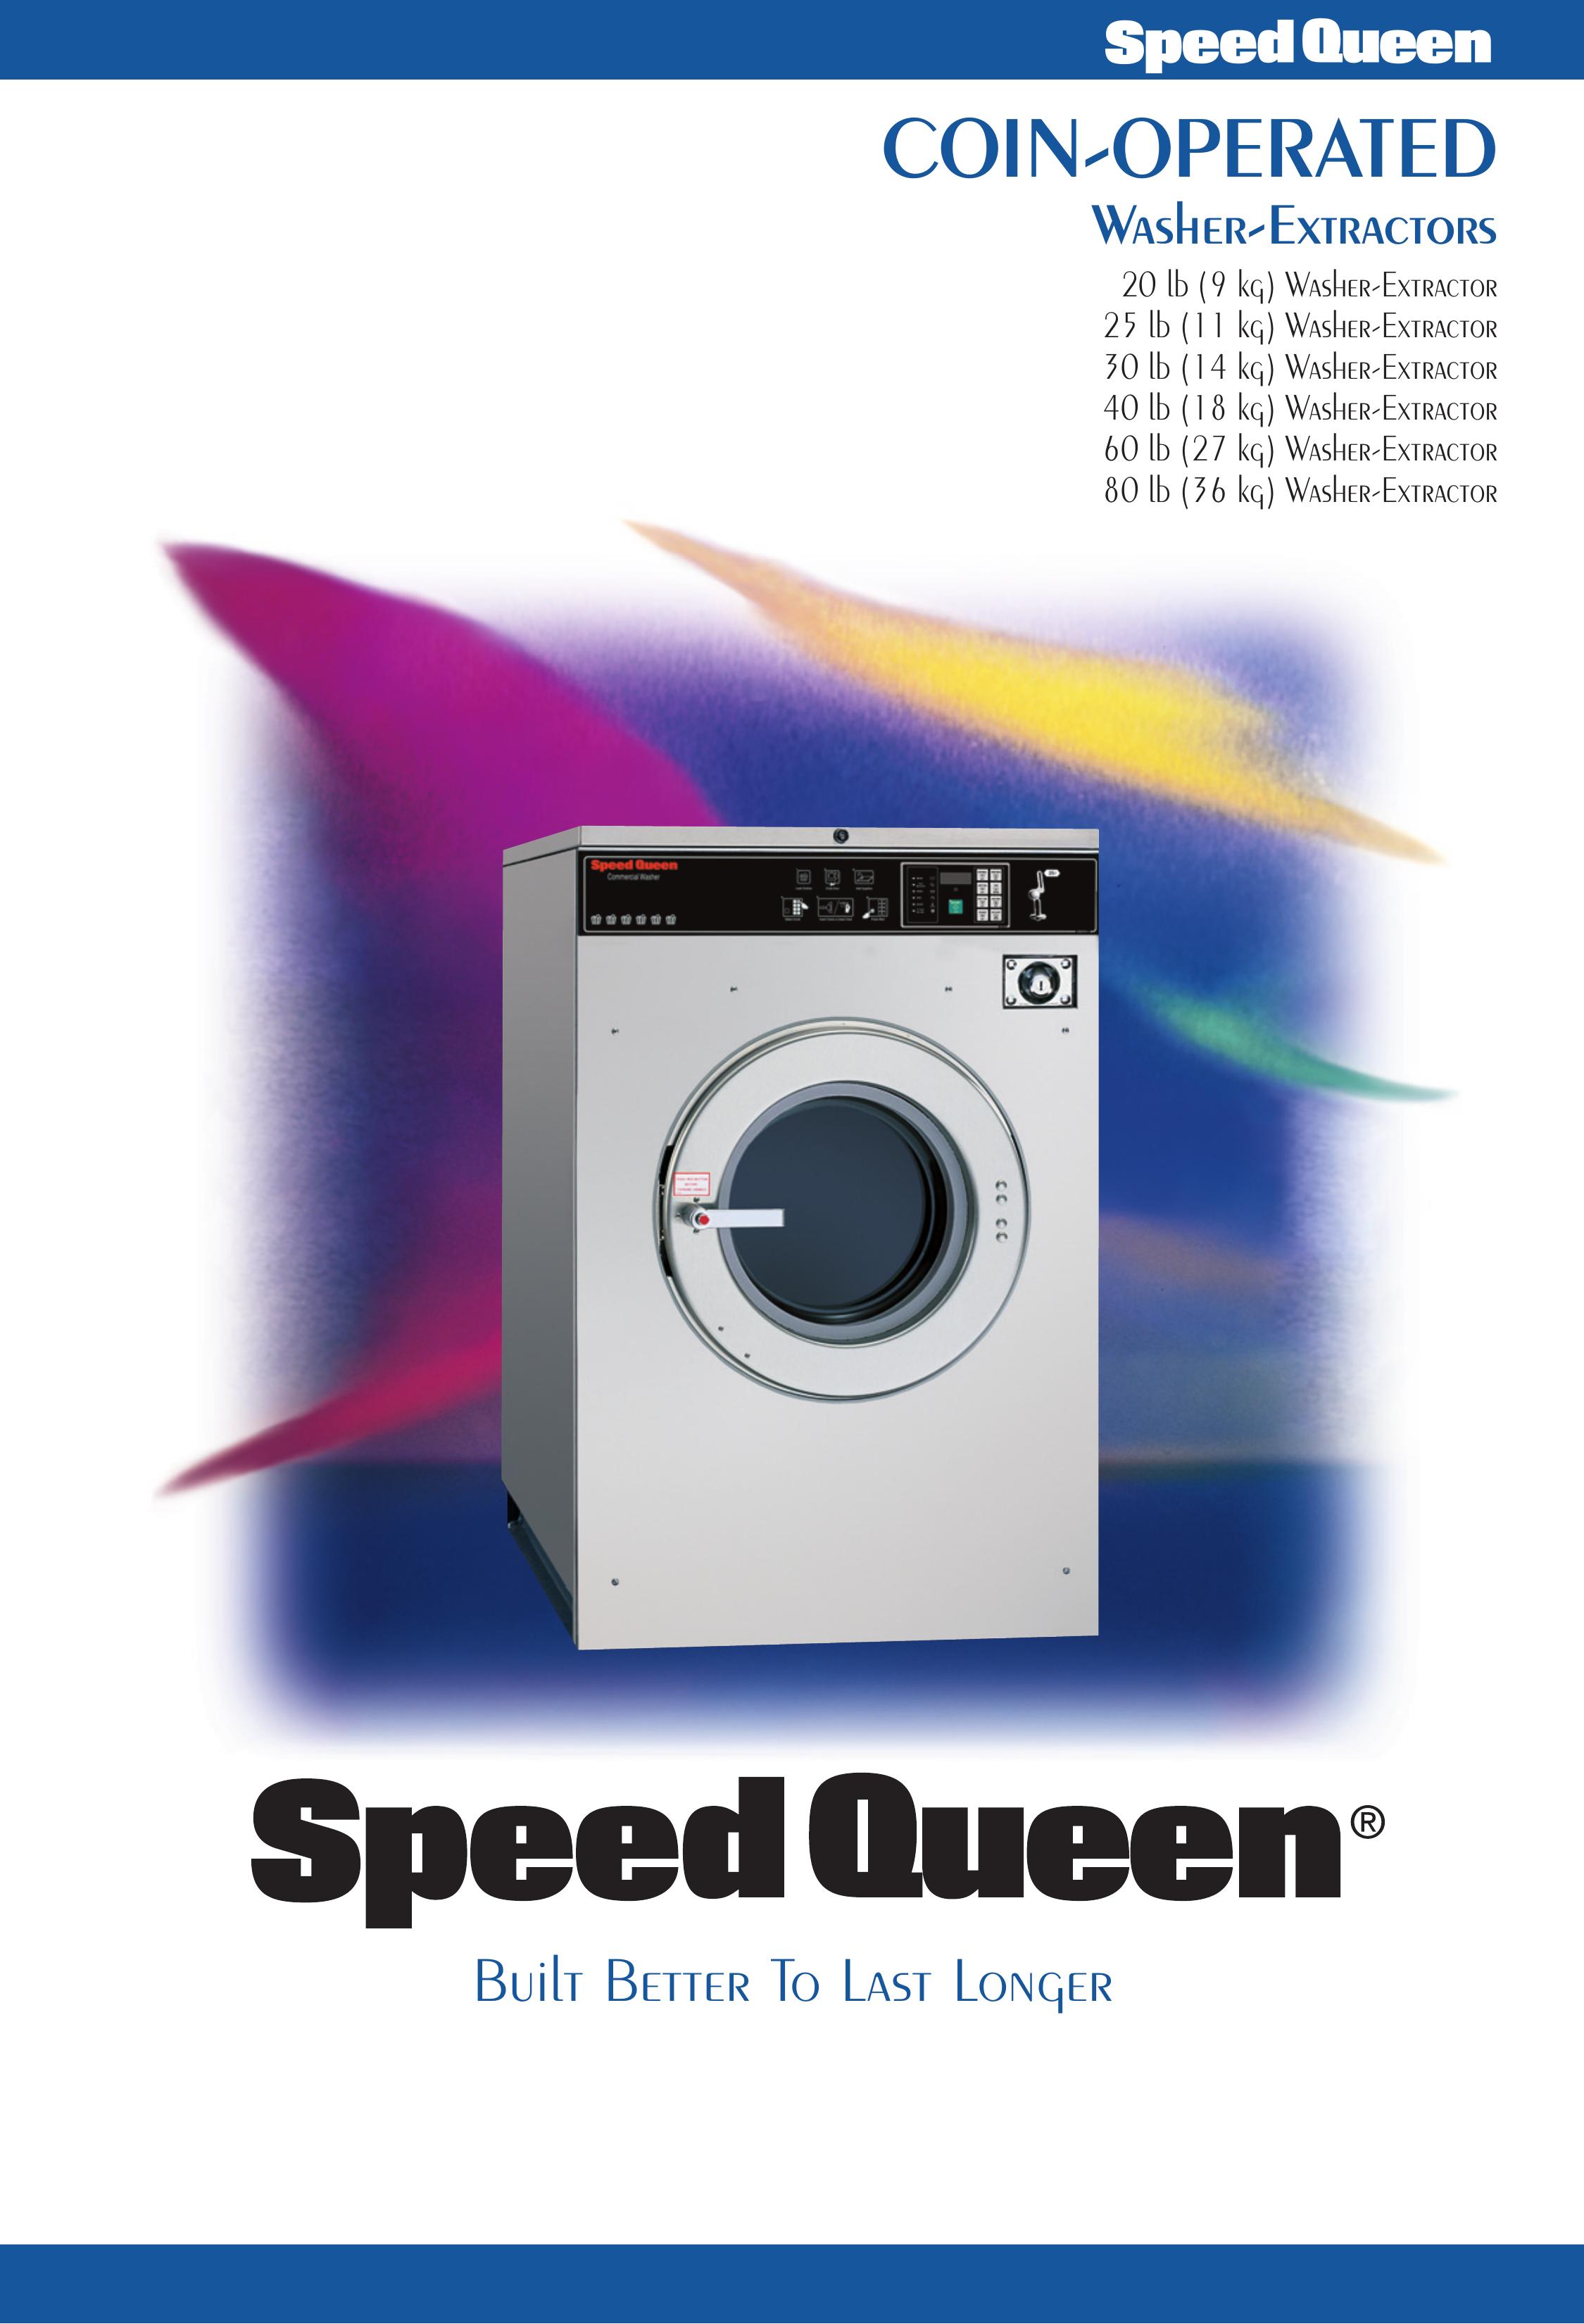 Speed Queen 60 lb Washer User Manual